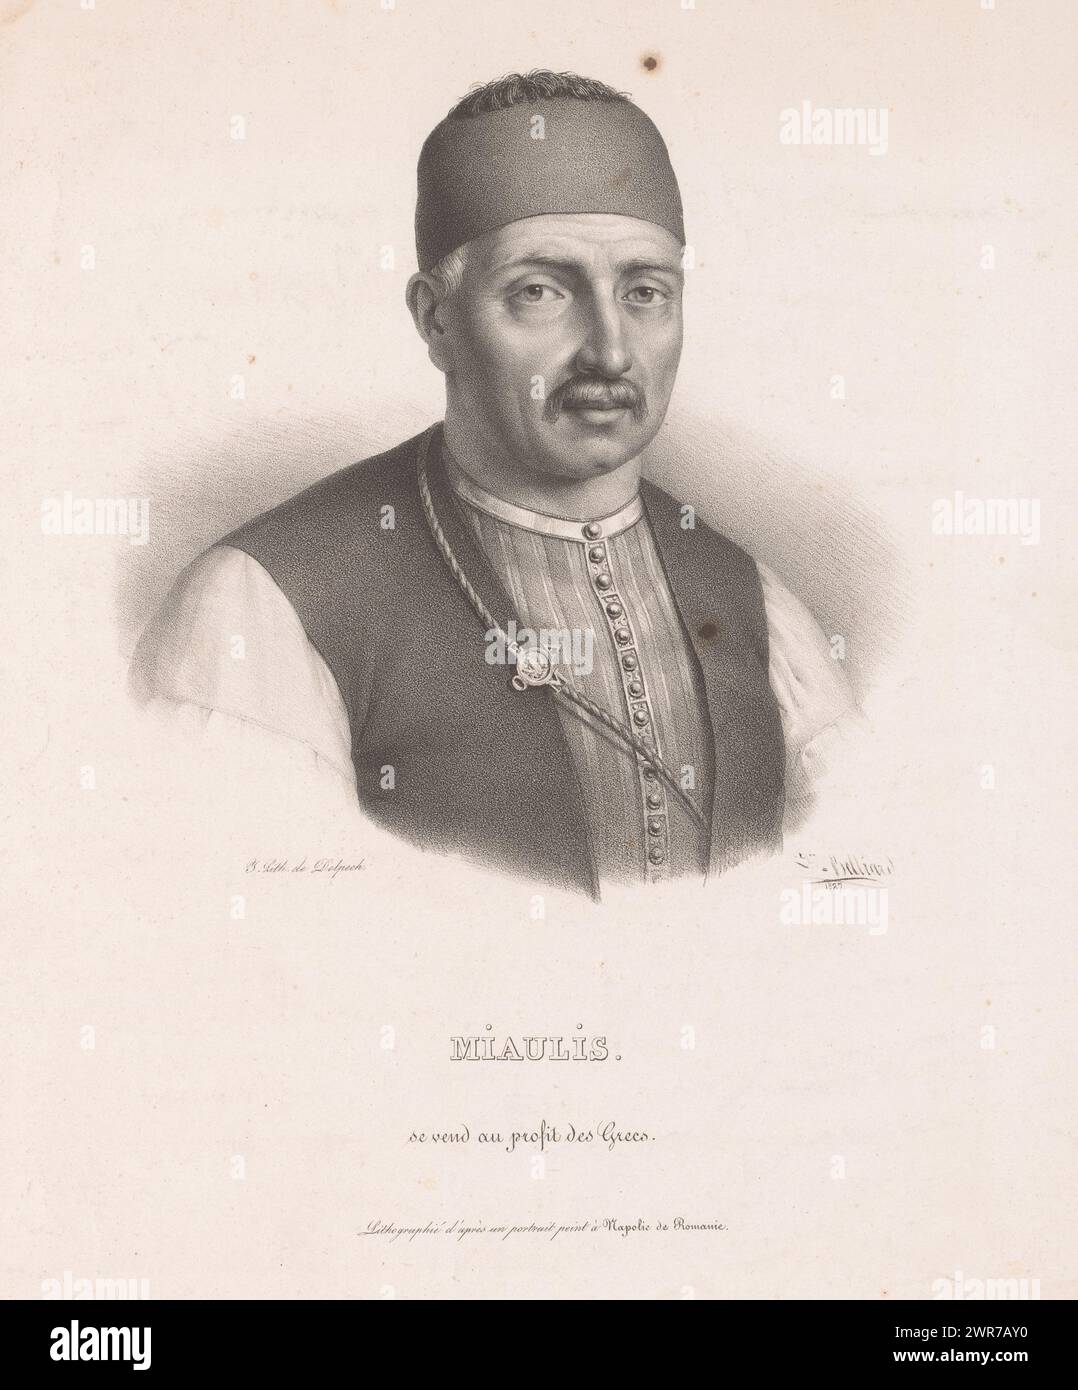 Portrait of Andreas Miaoulis, Miaulis (title on object), print maker: Zéphirin Félix Jean Marius Belliard, (rejected attribution), after painting by: anonymous, printer: veuve Delpech (Naudet), Paris, 1827, paper, height 440 mm × width 313 mm, print Stock Photo